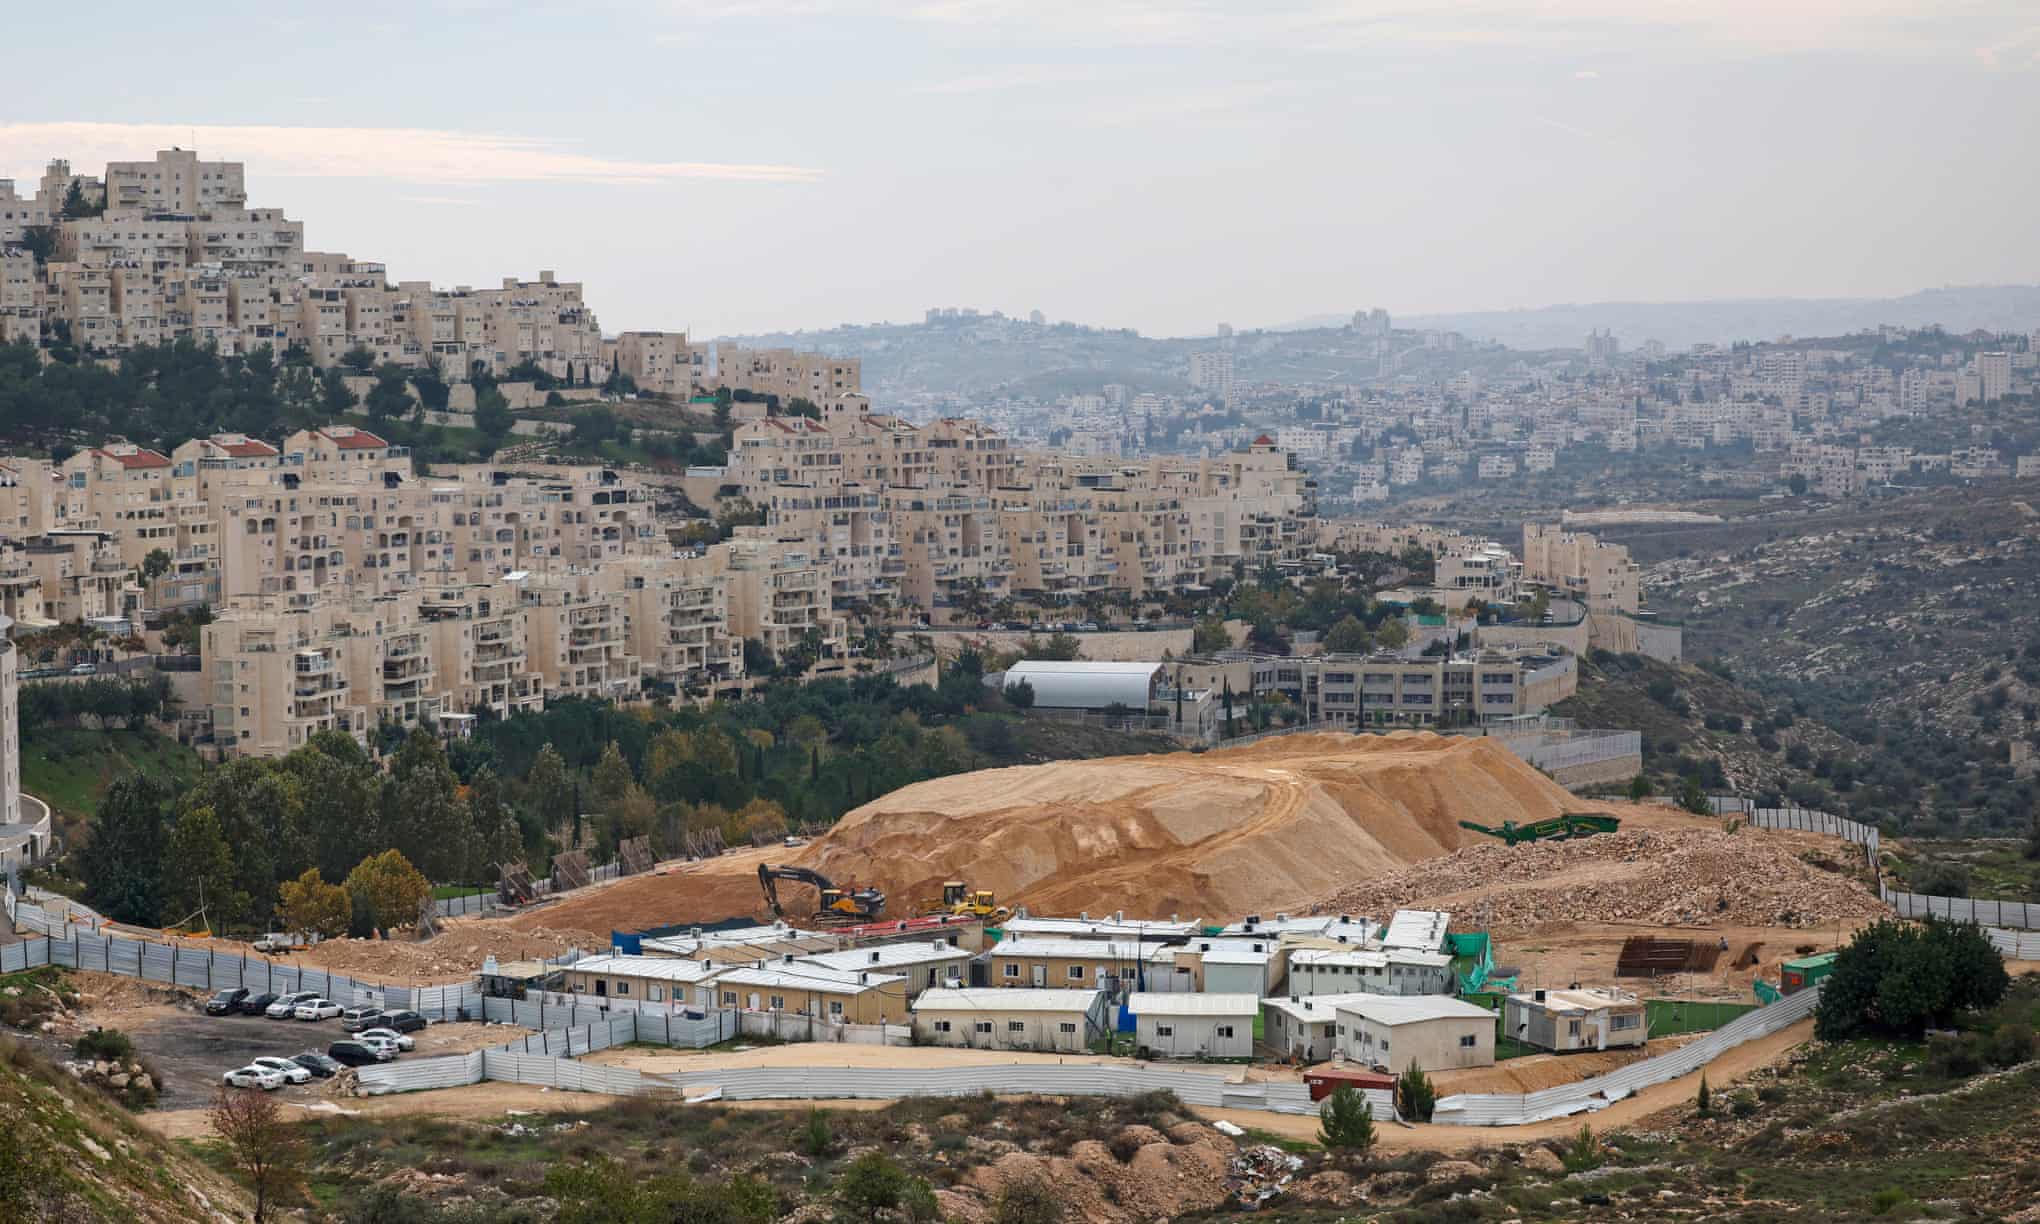 Revealed: how US residents are funding illegal settlements in the West Bank (theguardian.com)